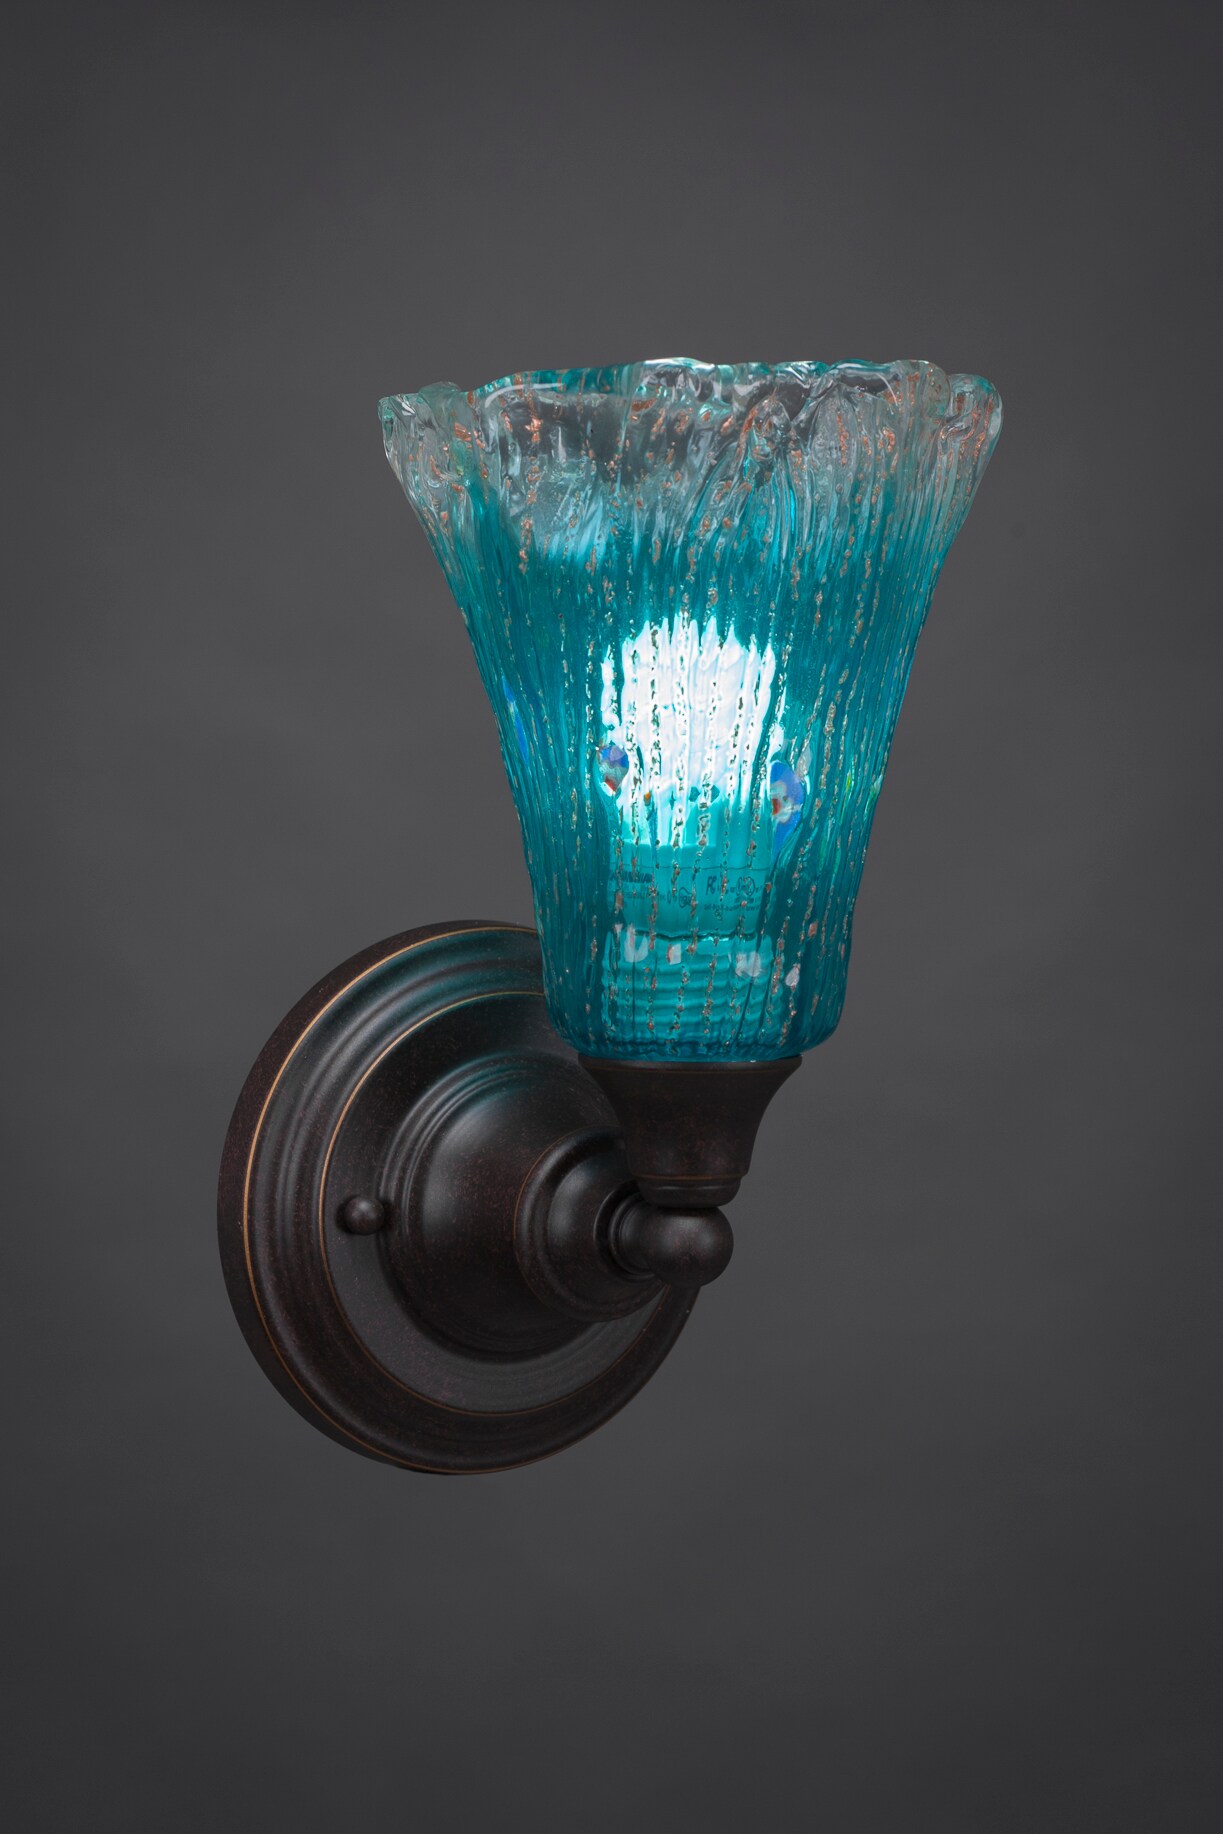 Wall Sconce Shown In Dark Granite Finish With 5.5 Teal Crystal Glass